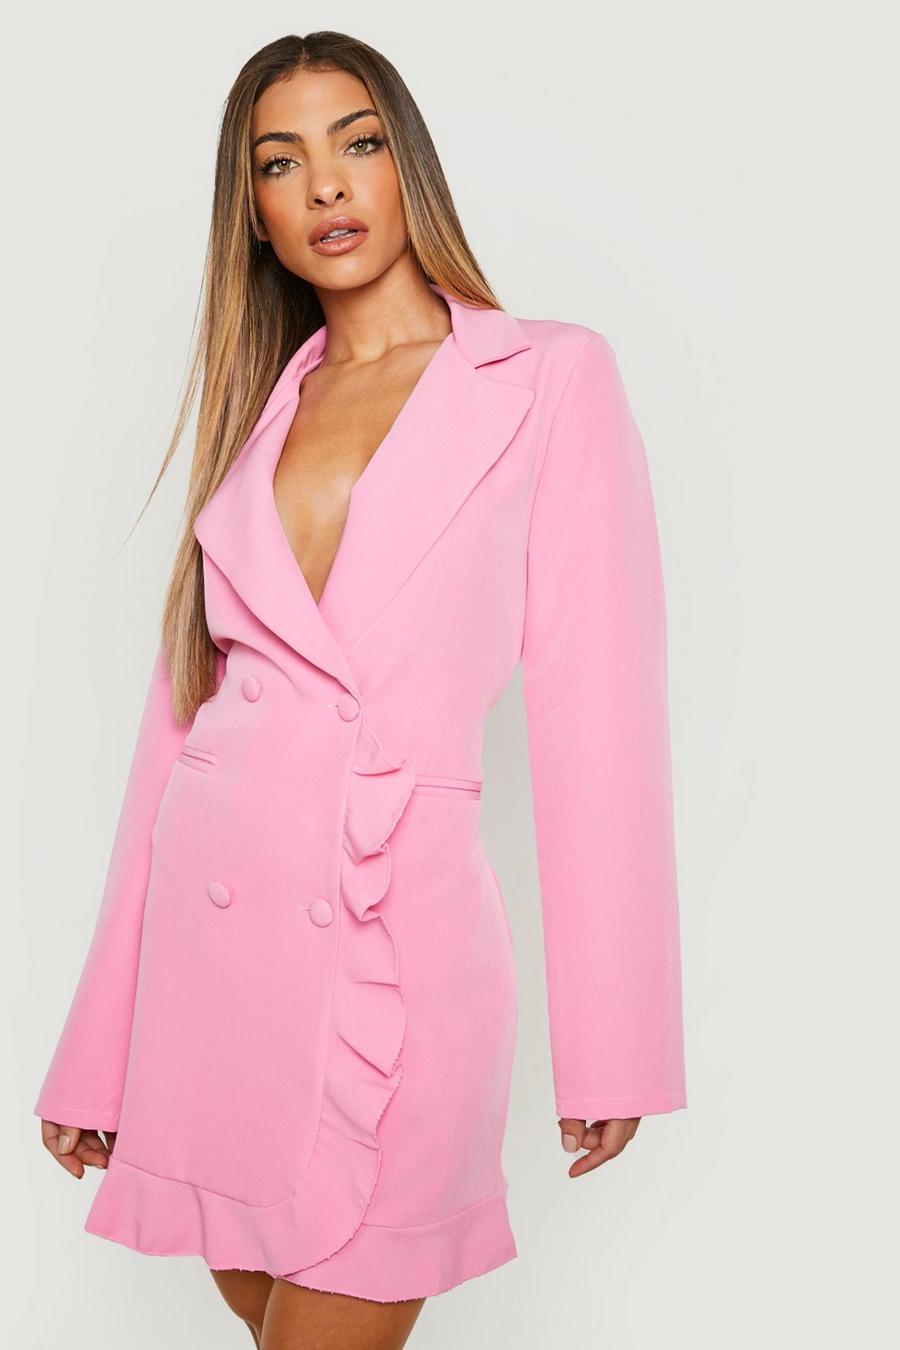 Candy pink Frill Detail Double Breasted Blazer Dress